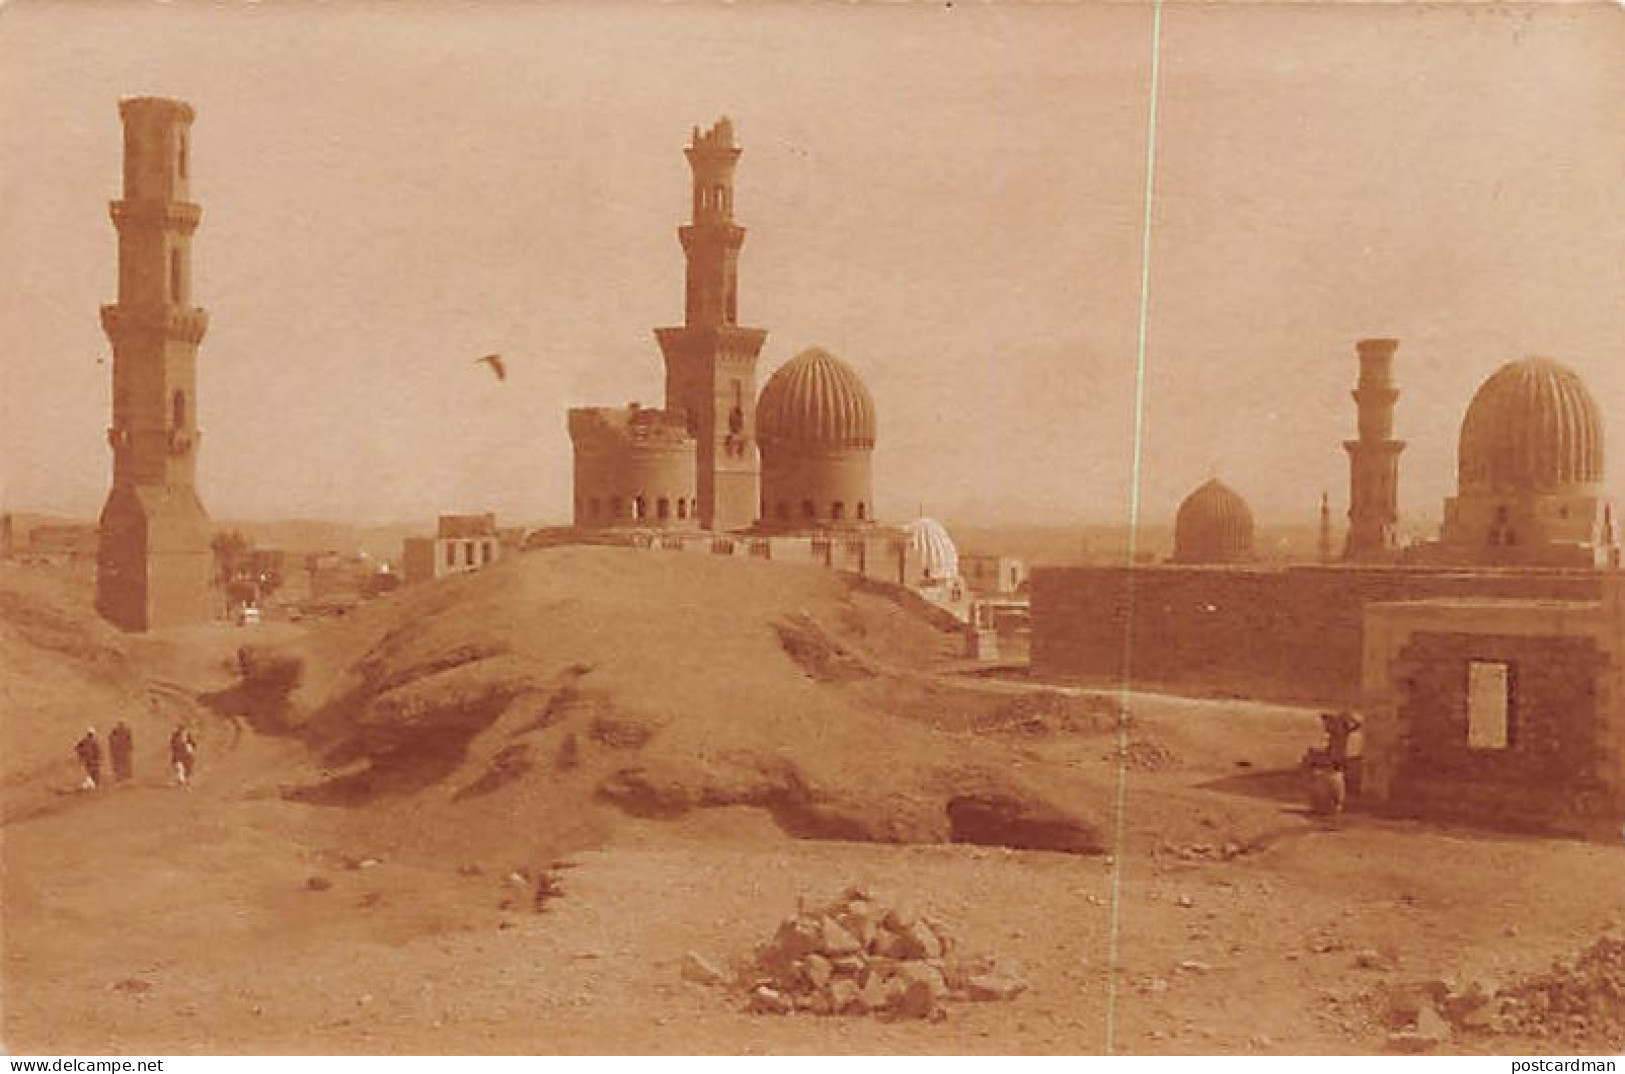 Egypt - CAIRO - Sultaniyya Mausoleum - REAL PHOTO - Publ. Unknown  - Le Caire